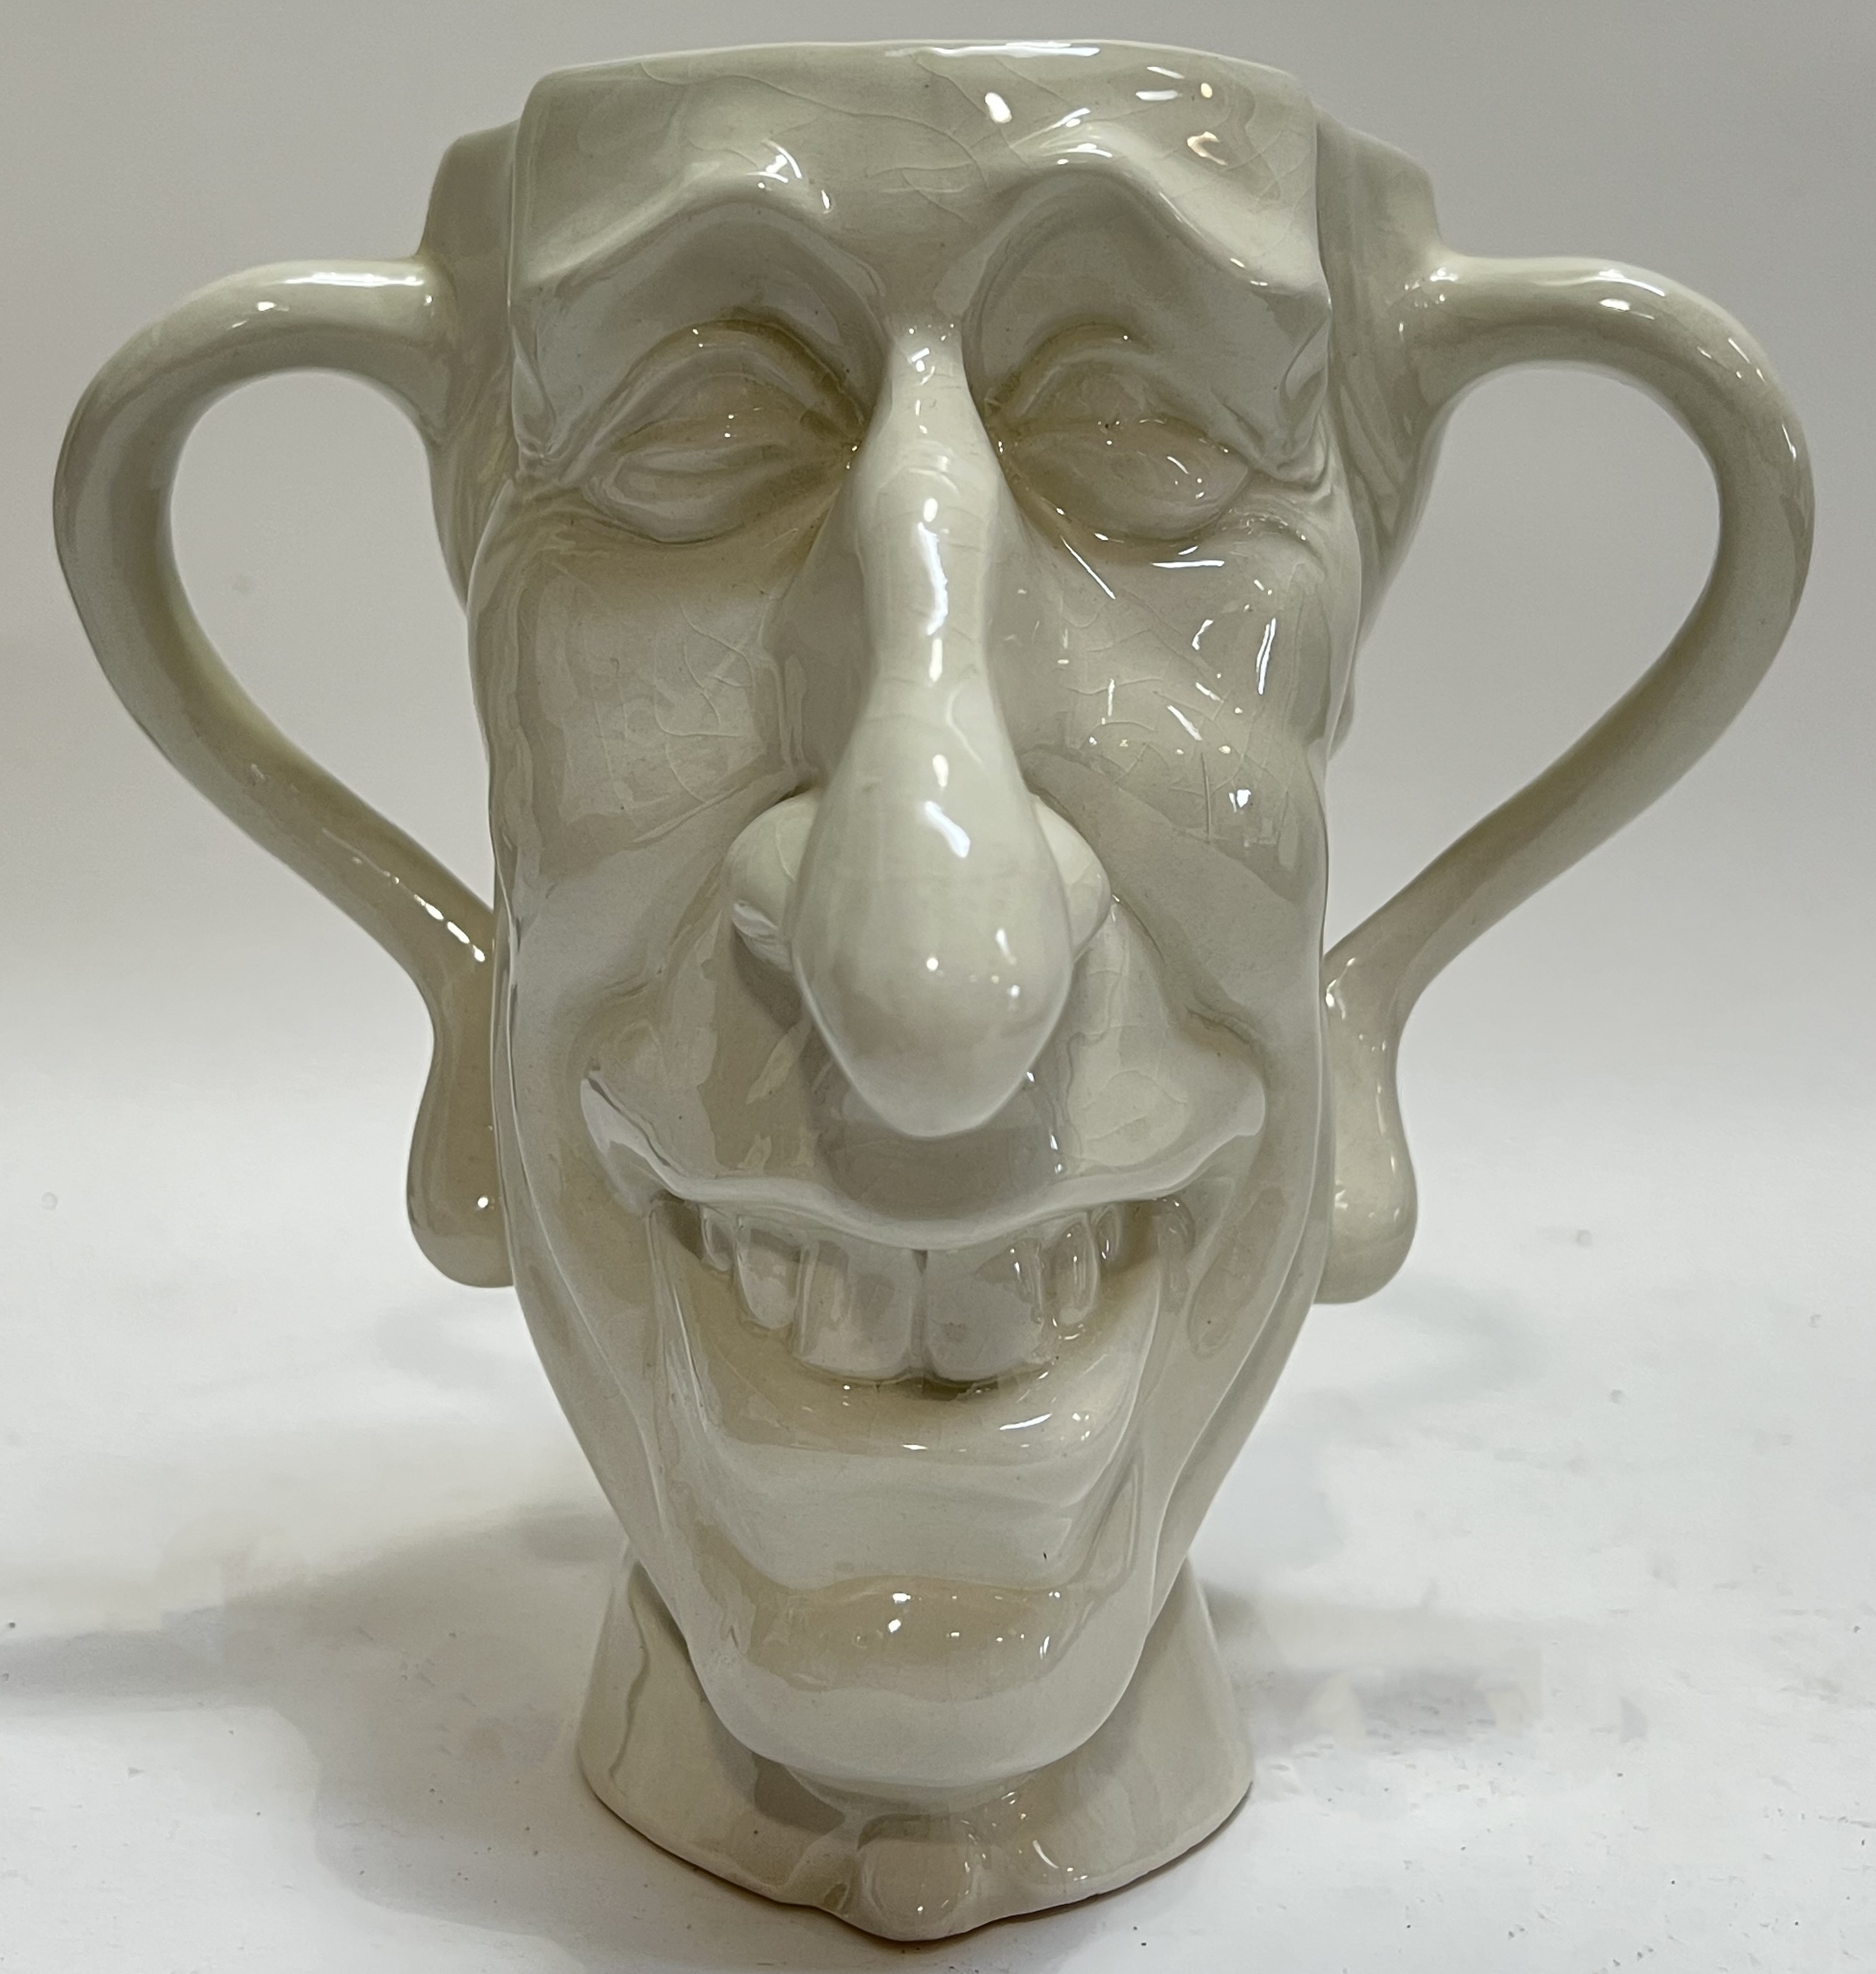 A Luck and Flaw Spitting Image character jug of Prince (now King) Charles (c. 1981) (cracks, h-